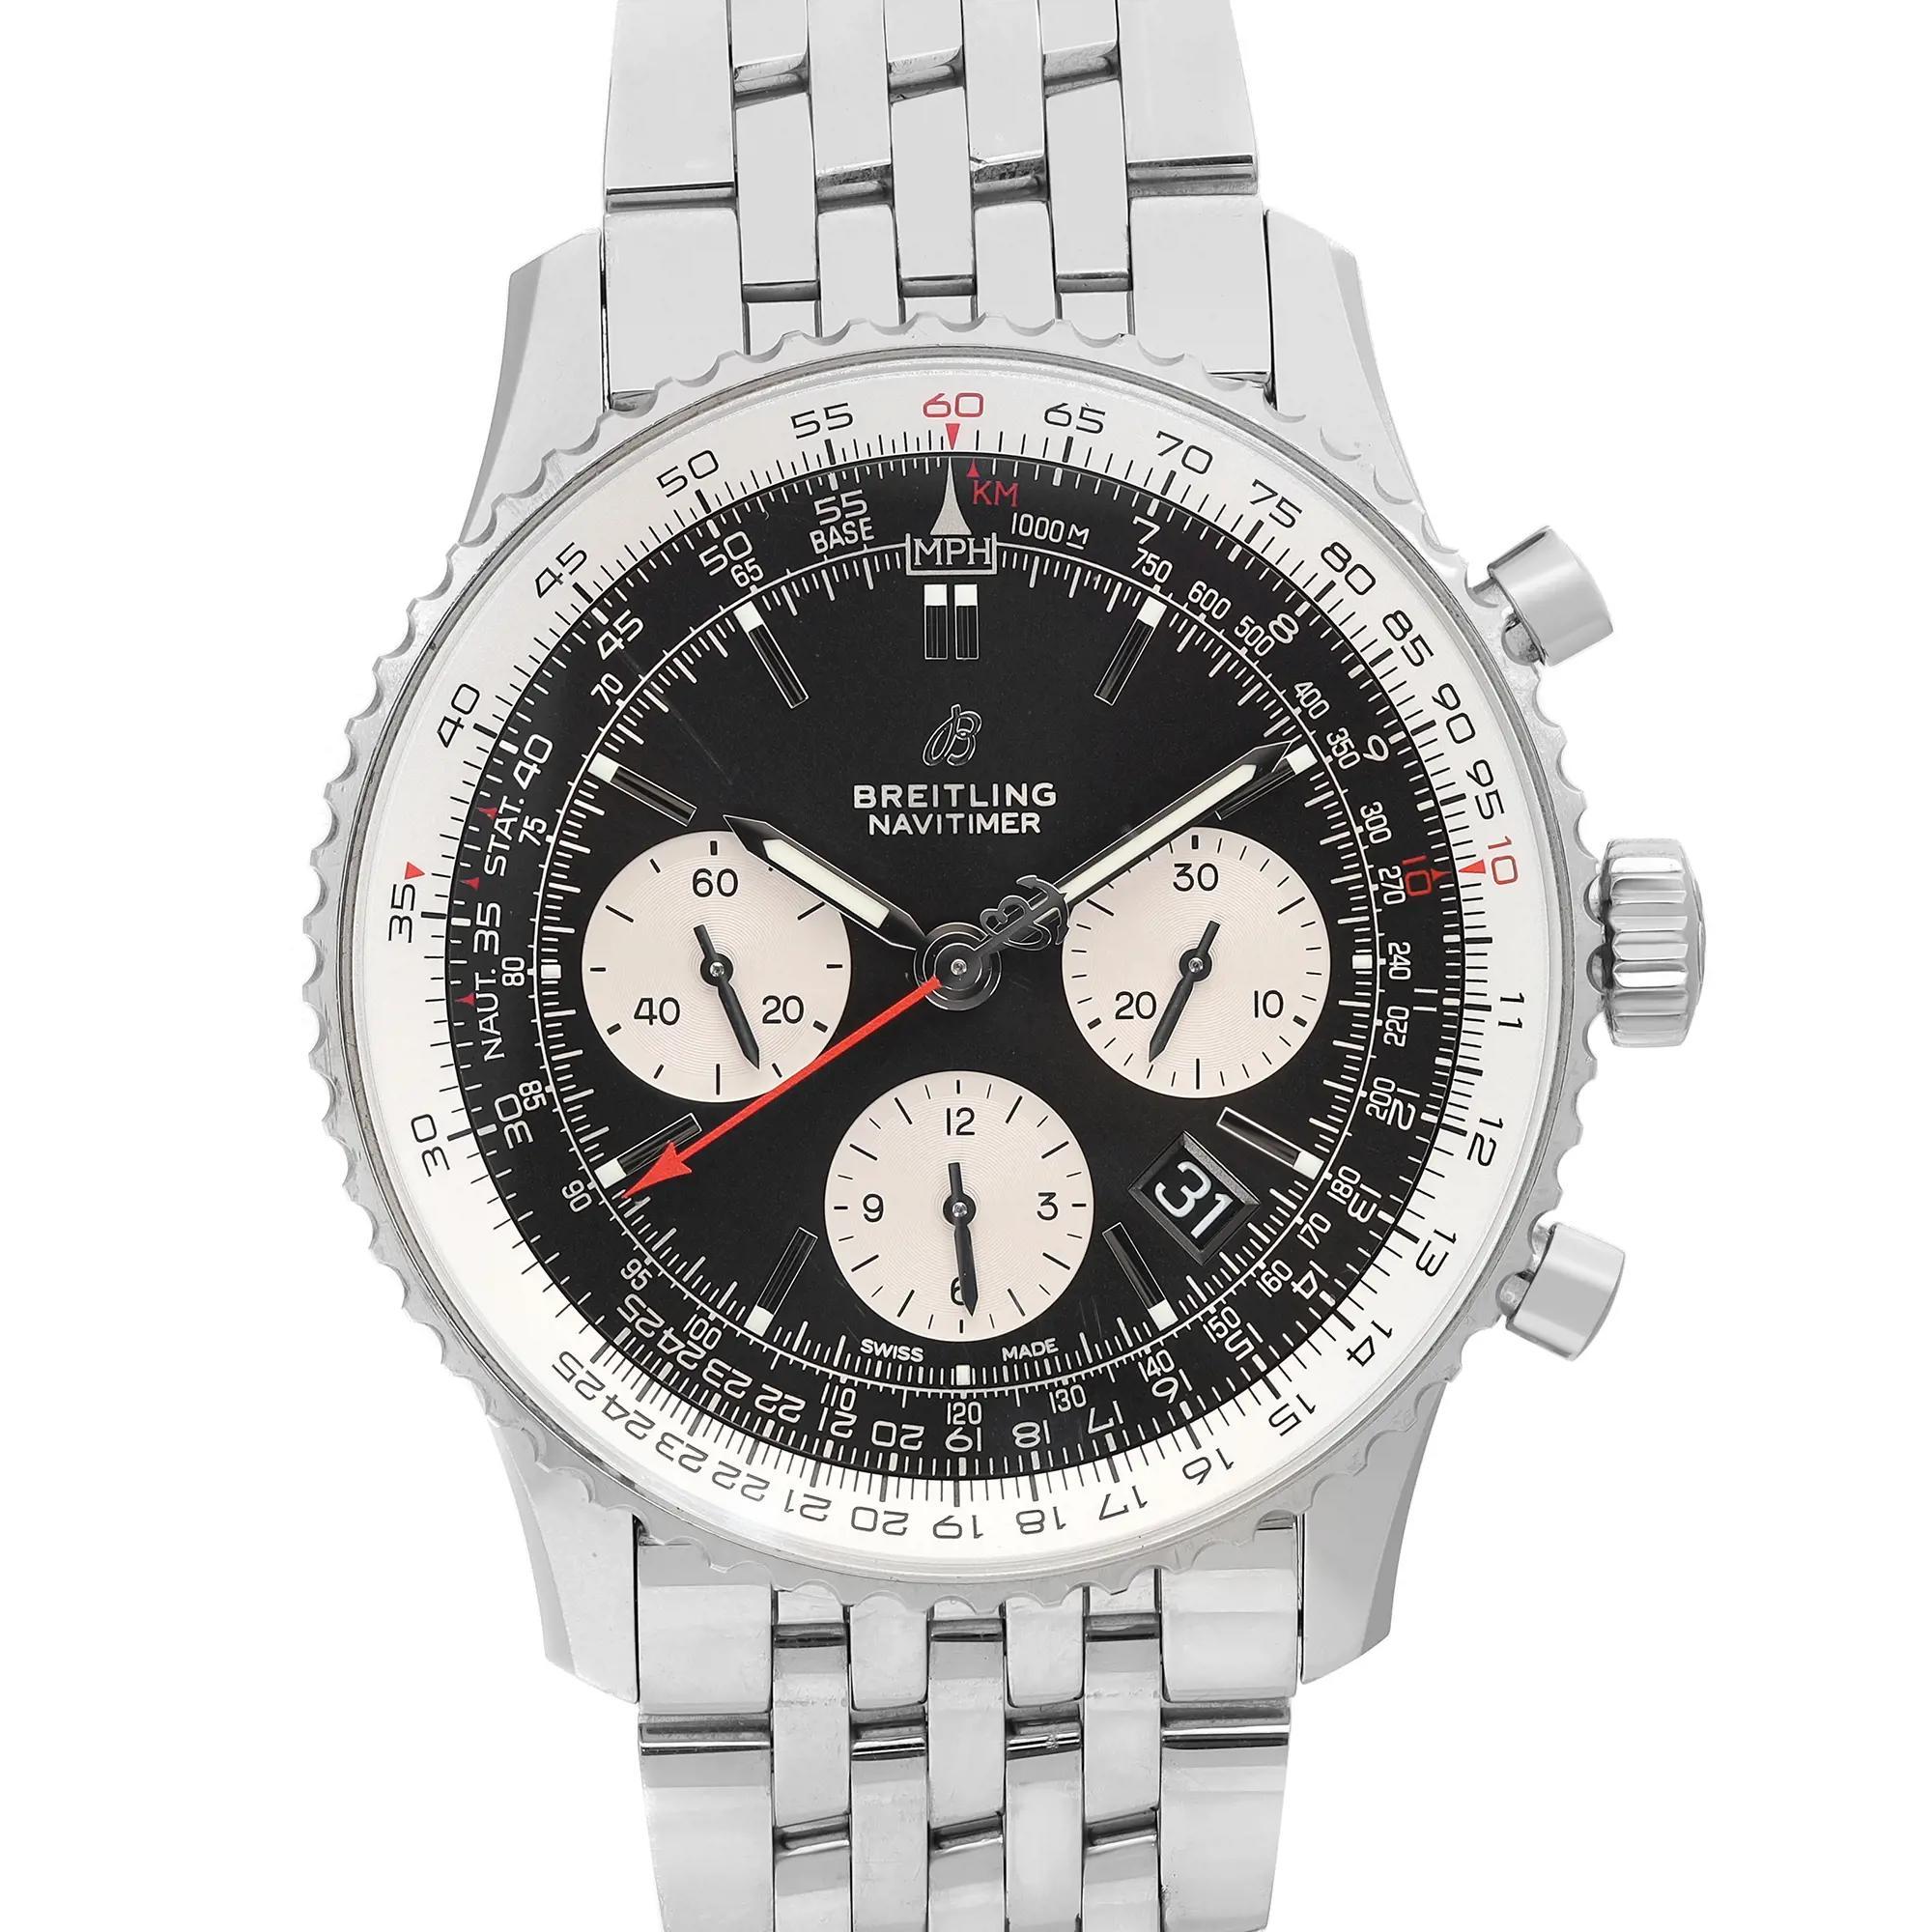 Store Display Model. Comes with the original box and chronometre paper.

 Brand: Breitling  Type: Wristwatch  Department: Men  Model Number: AB0121211B1A1  Country/Region of Manufacture: Switzerland  Style: Sport  Model: Breitling Navitimer 